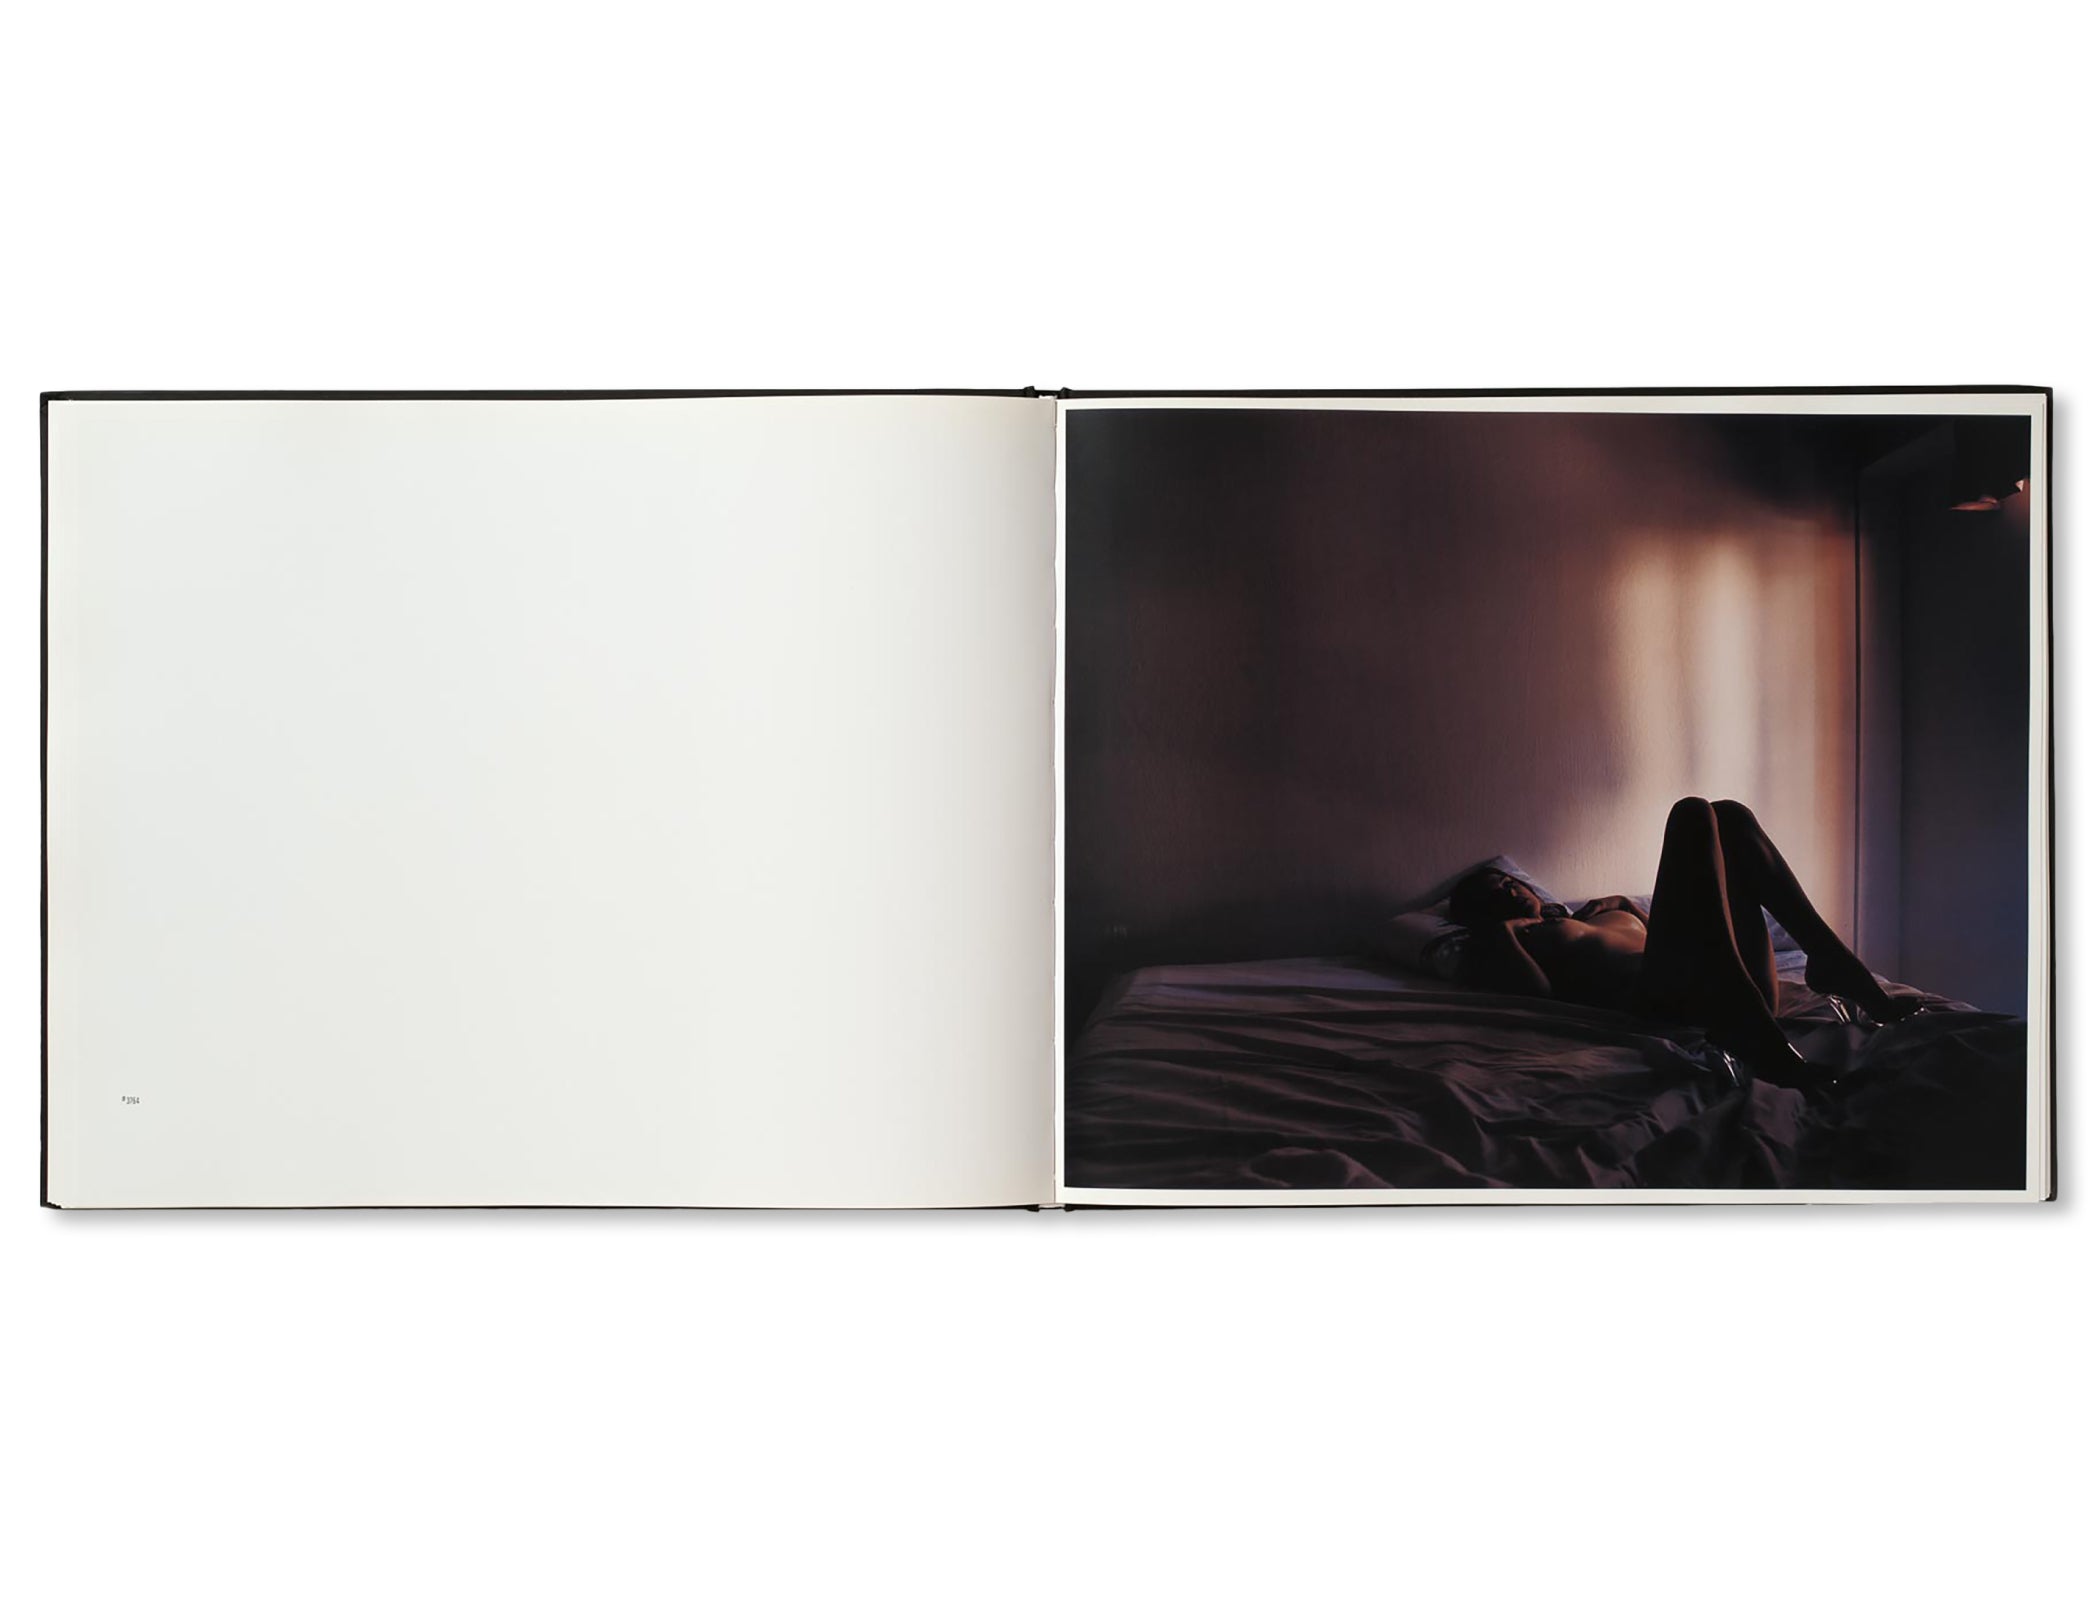 BETWEEN THE TWO by Todd Hido [FIRST EDITION]